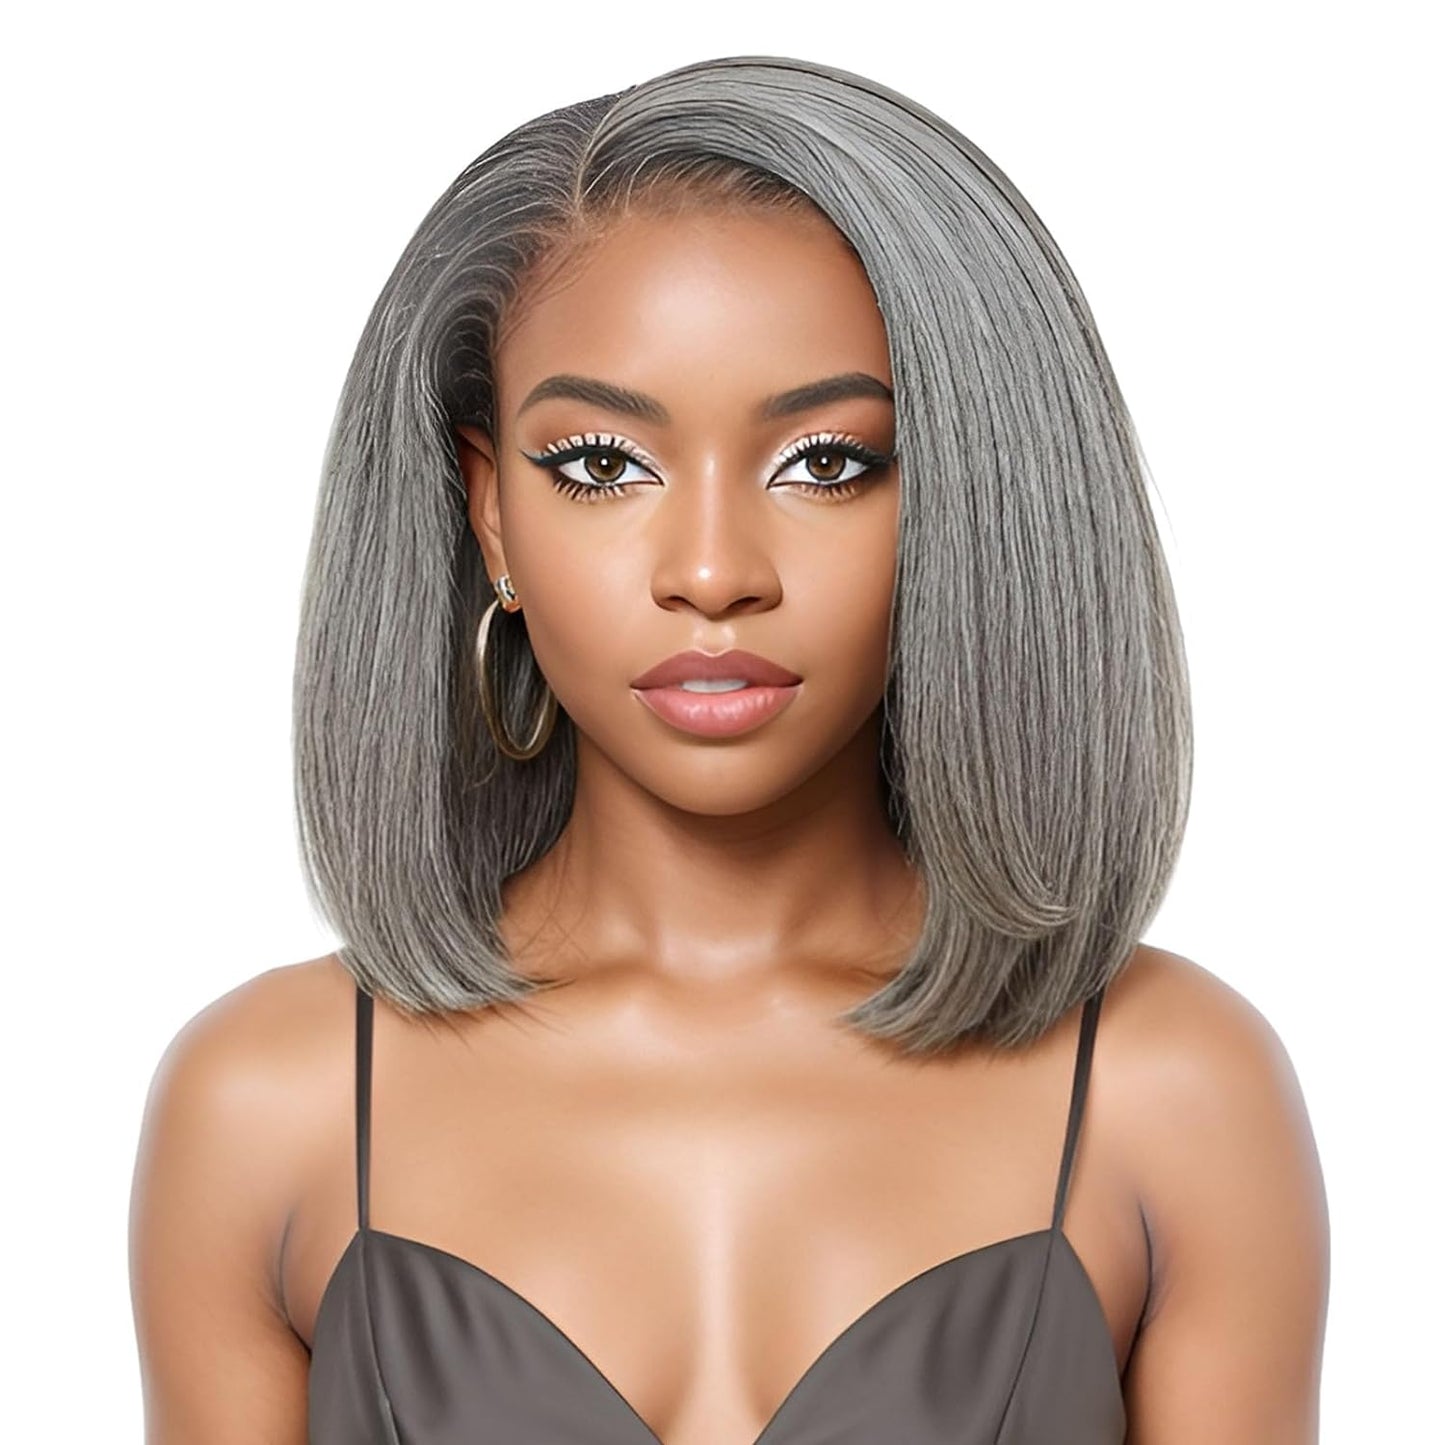 Wear and Go Glueless Bob Wigs Human Hair Salt and Pepper Grey Wigs Human Hair Pre Plucked Short Bob Wig 12" Body Wave Lace Front Wigs Pre Cut 5x5 Closure HD Transparent Glueless Wigs for Women